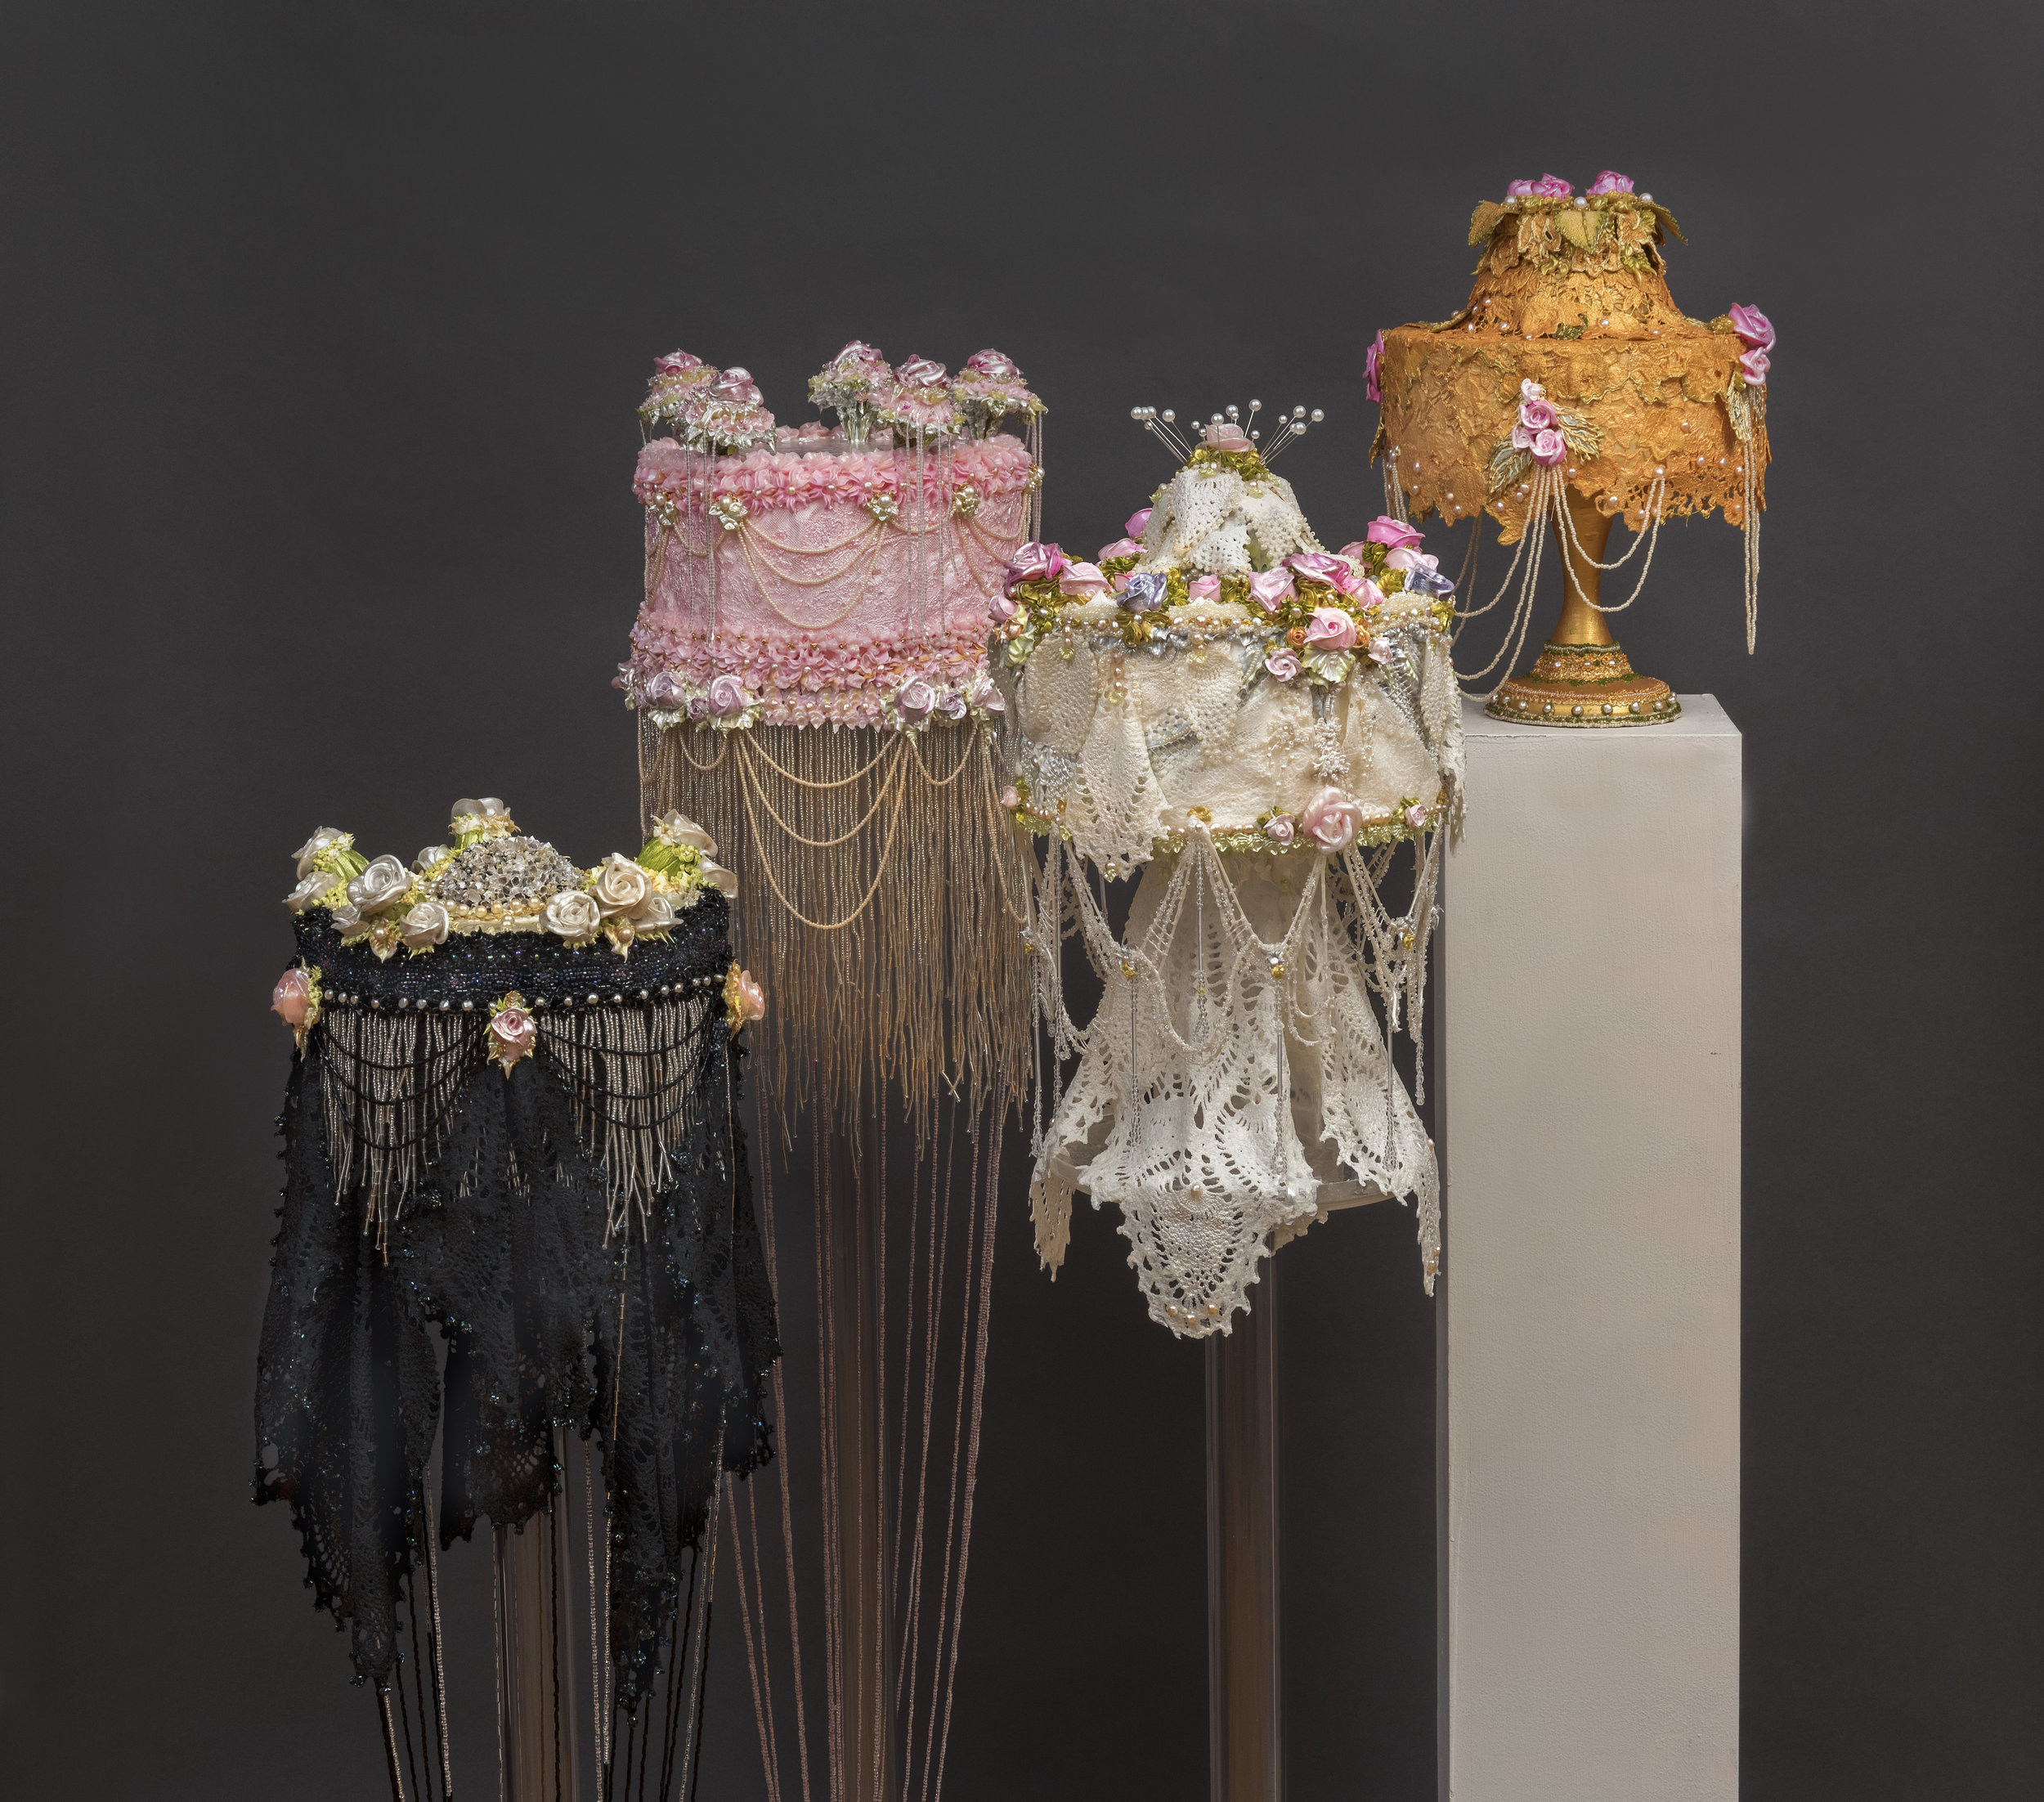 Four acrylic cakes (black, pink, white, orange) with pearls hanging